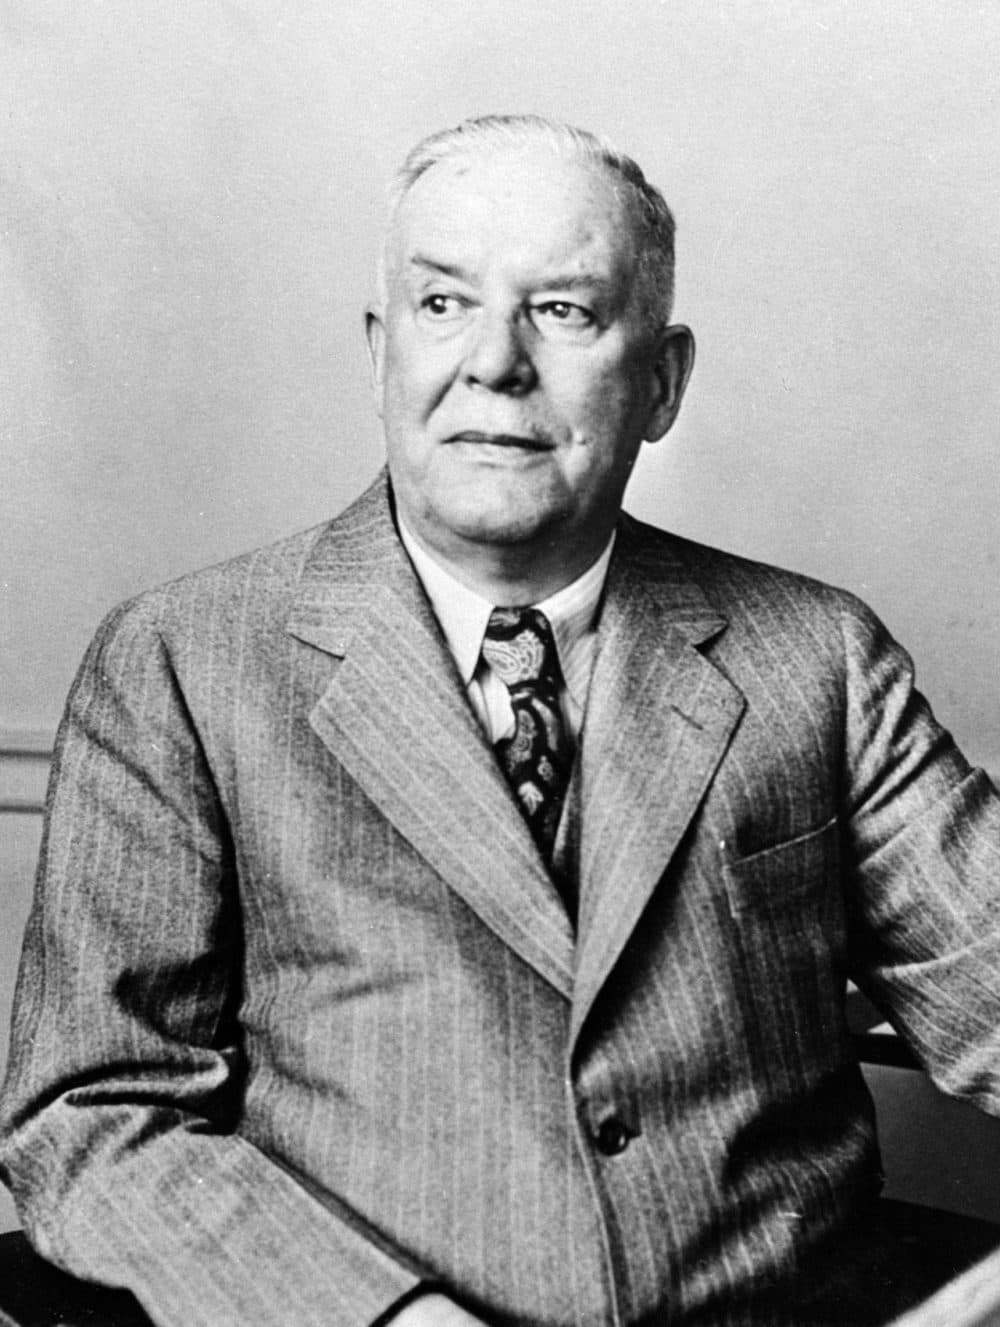 Poetry and National book award winner, Wallace Stevens in 1951. (AP)